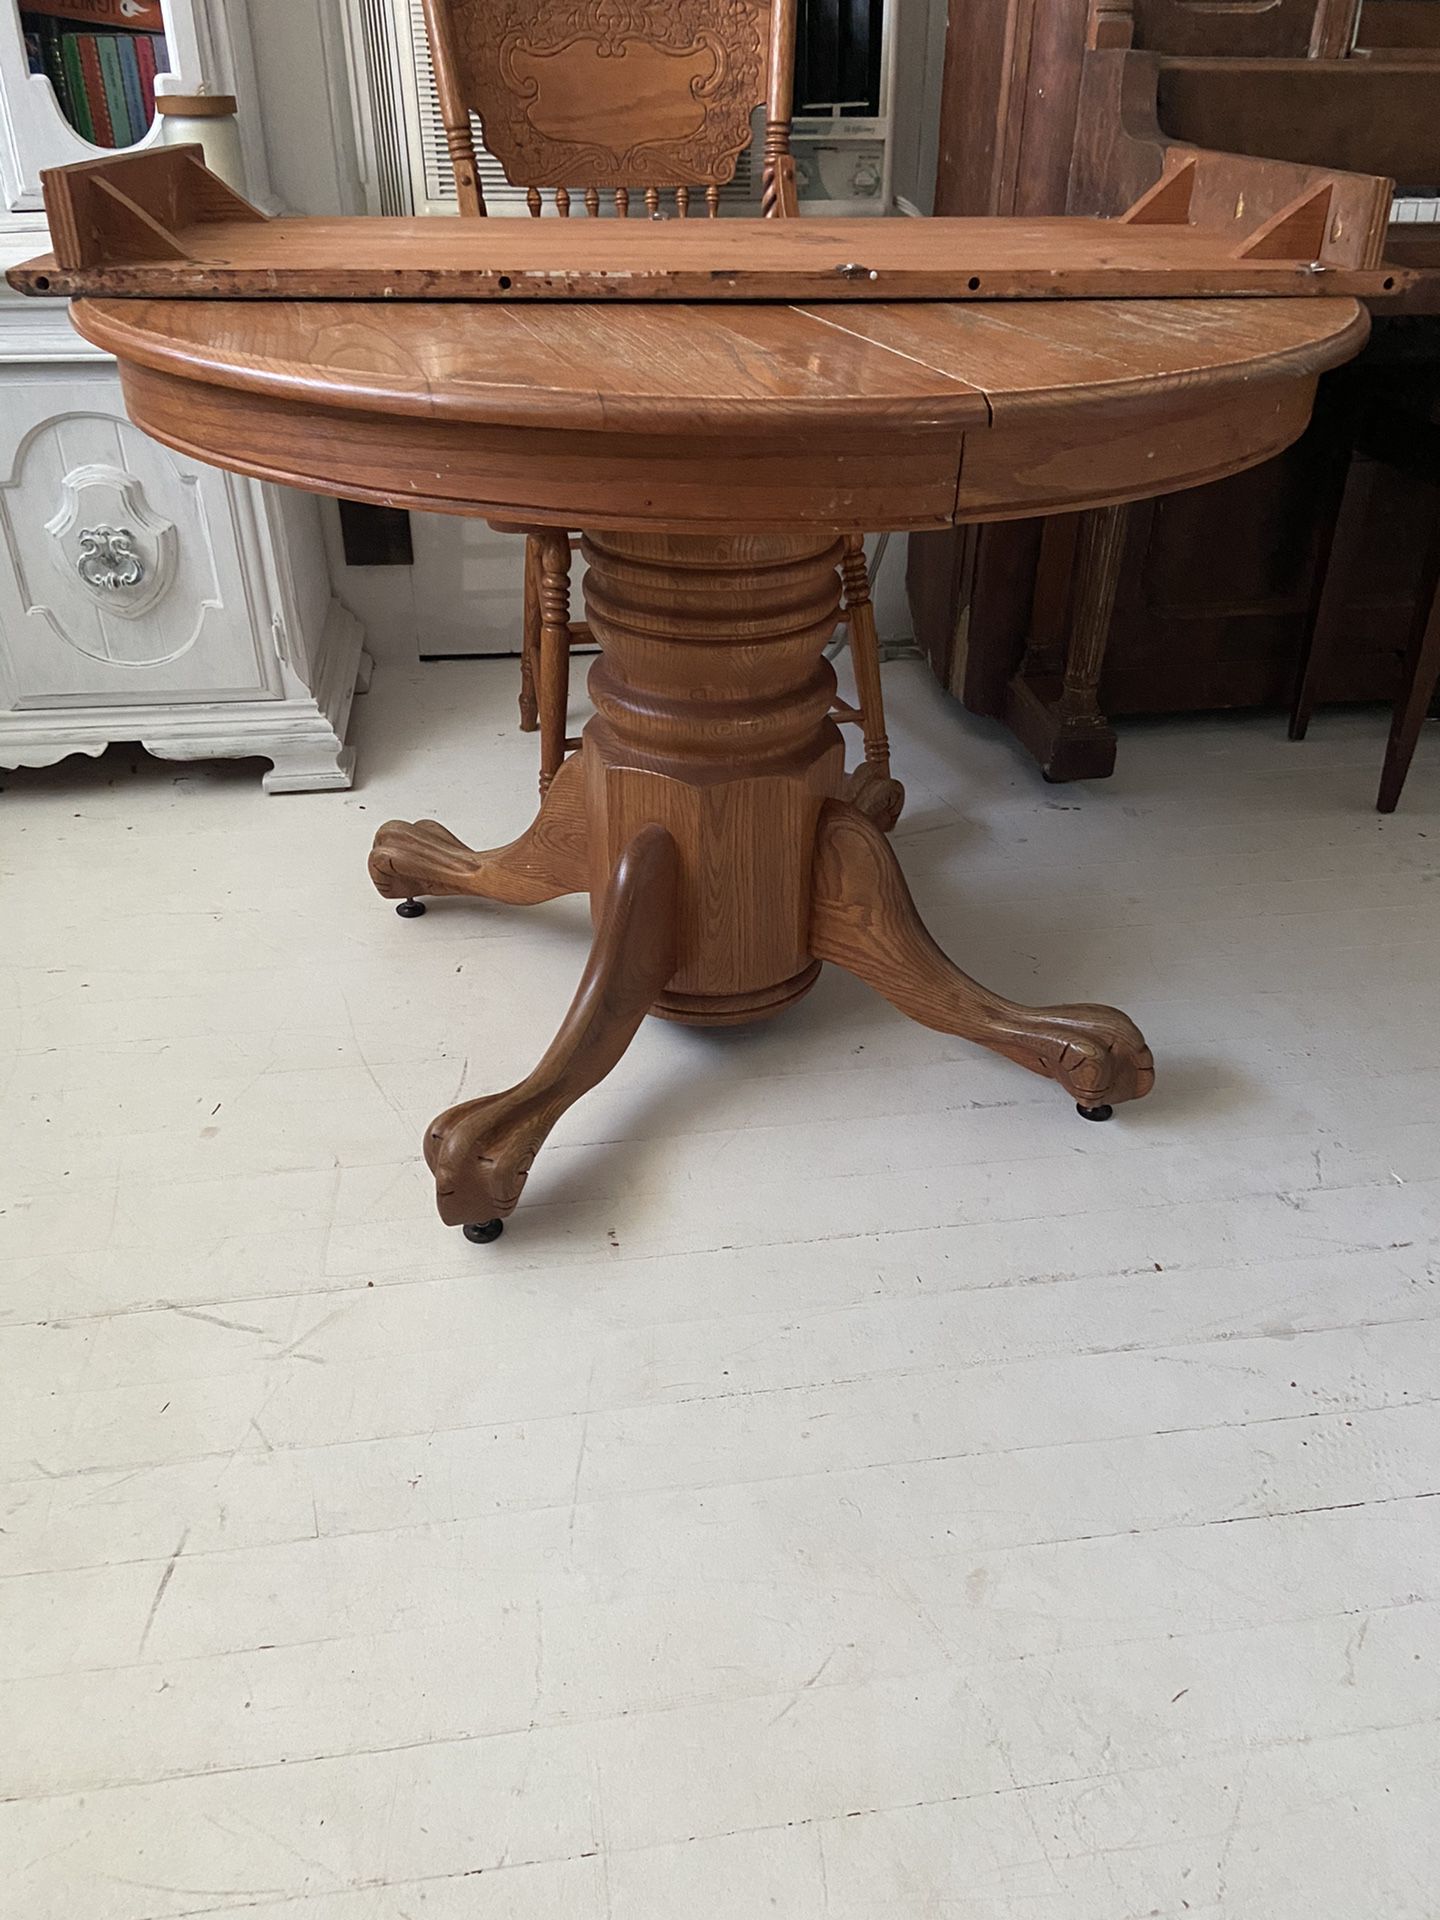 Vintage round table with leaf. Chair not included.